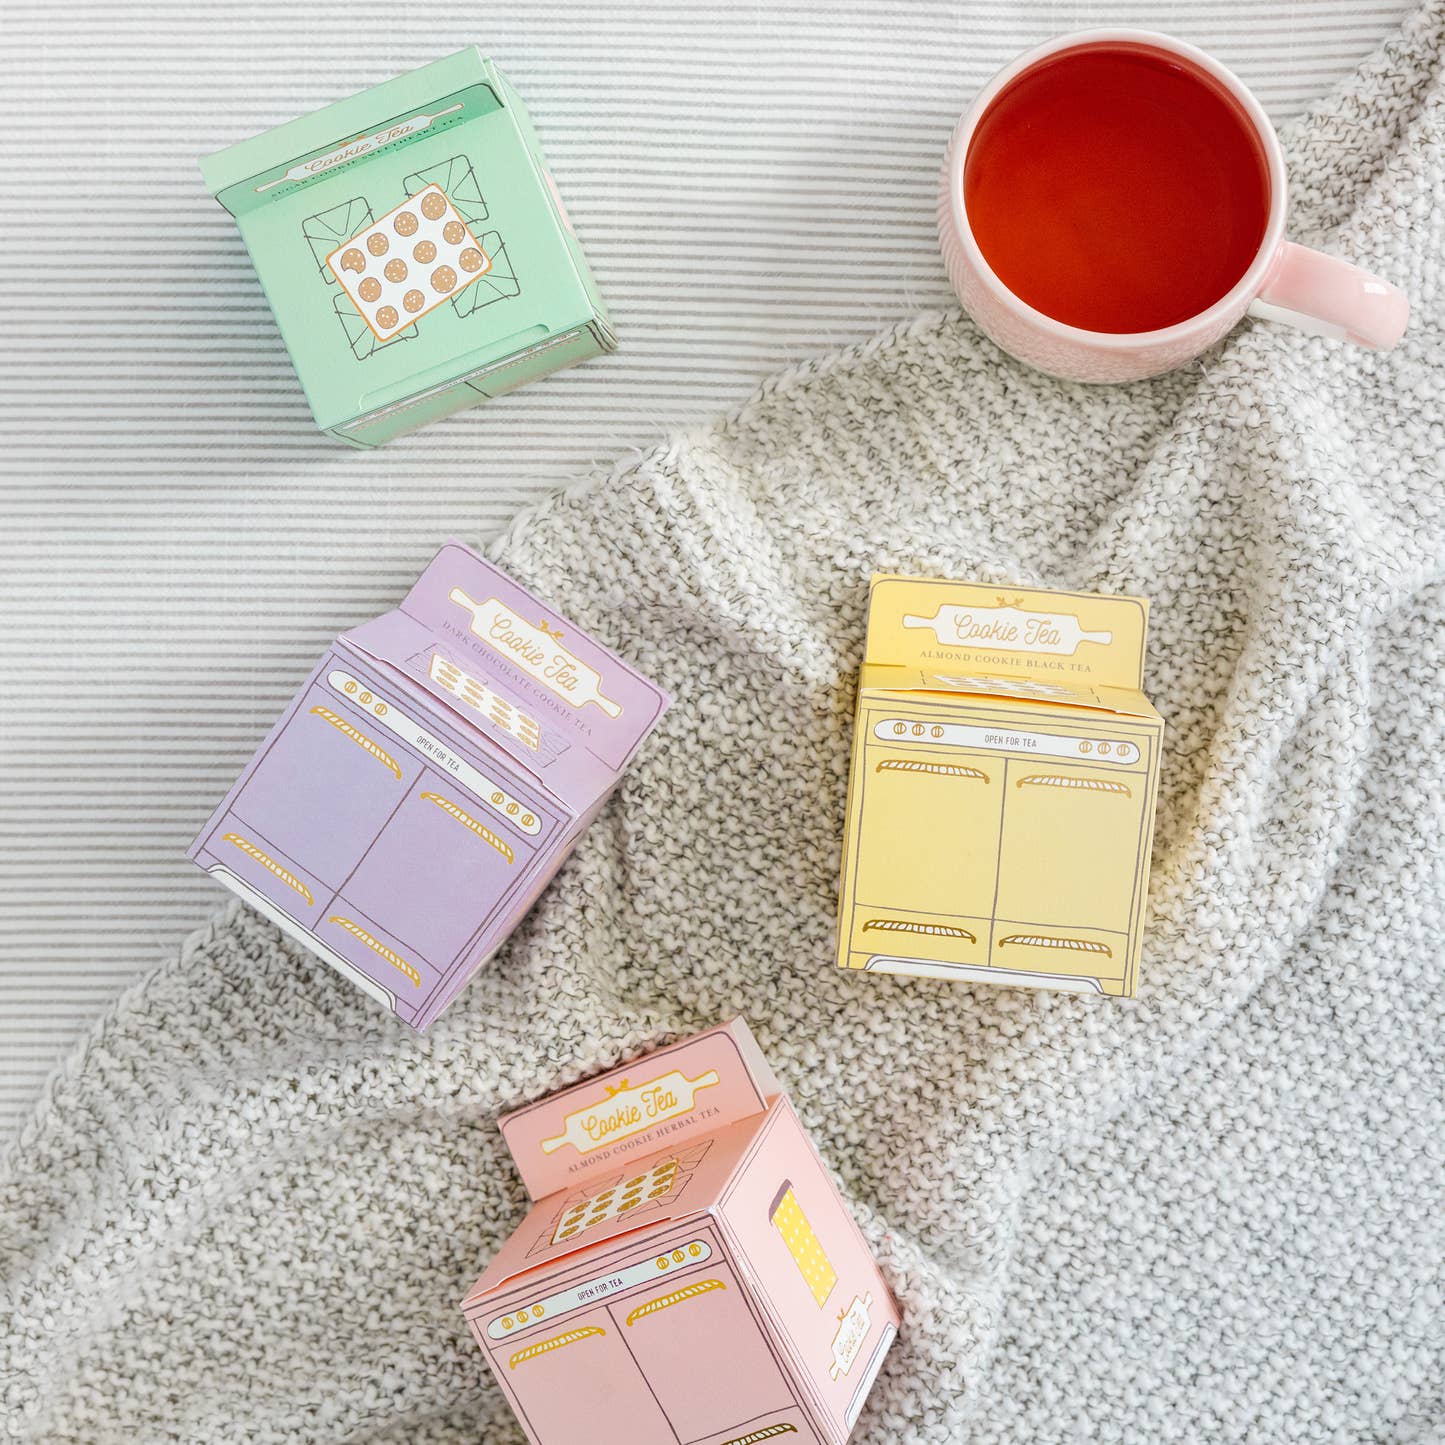 Pink, green, yellow, and purple cookie tea ovens displayed on gray blanket with a cup of brewed cookie tea from Sips by